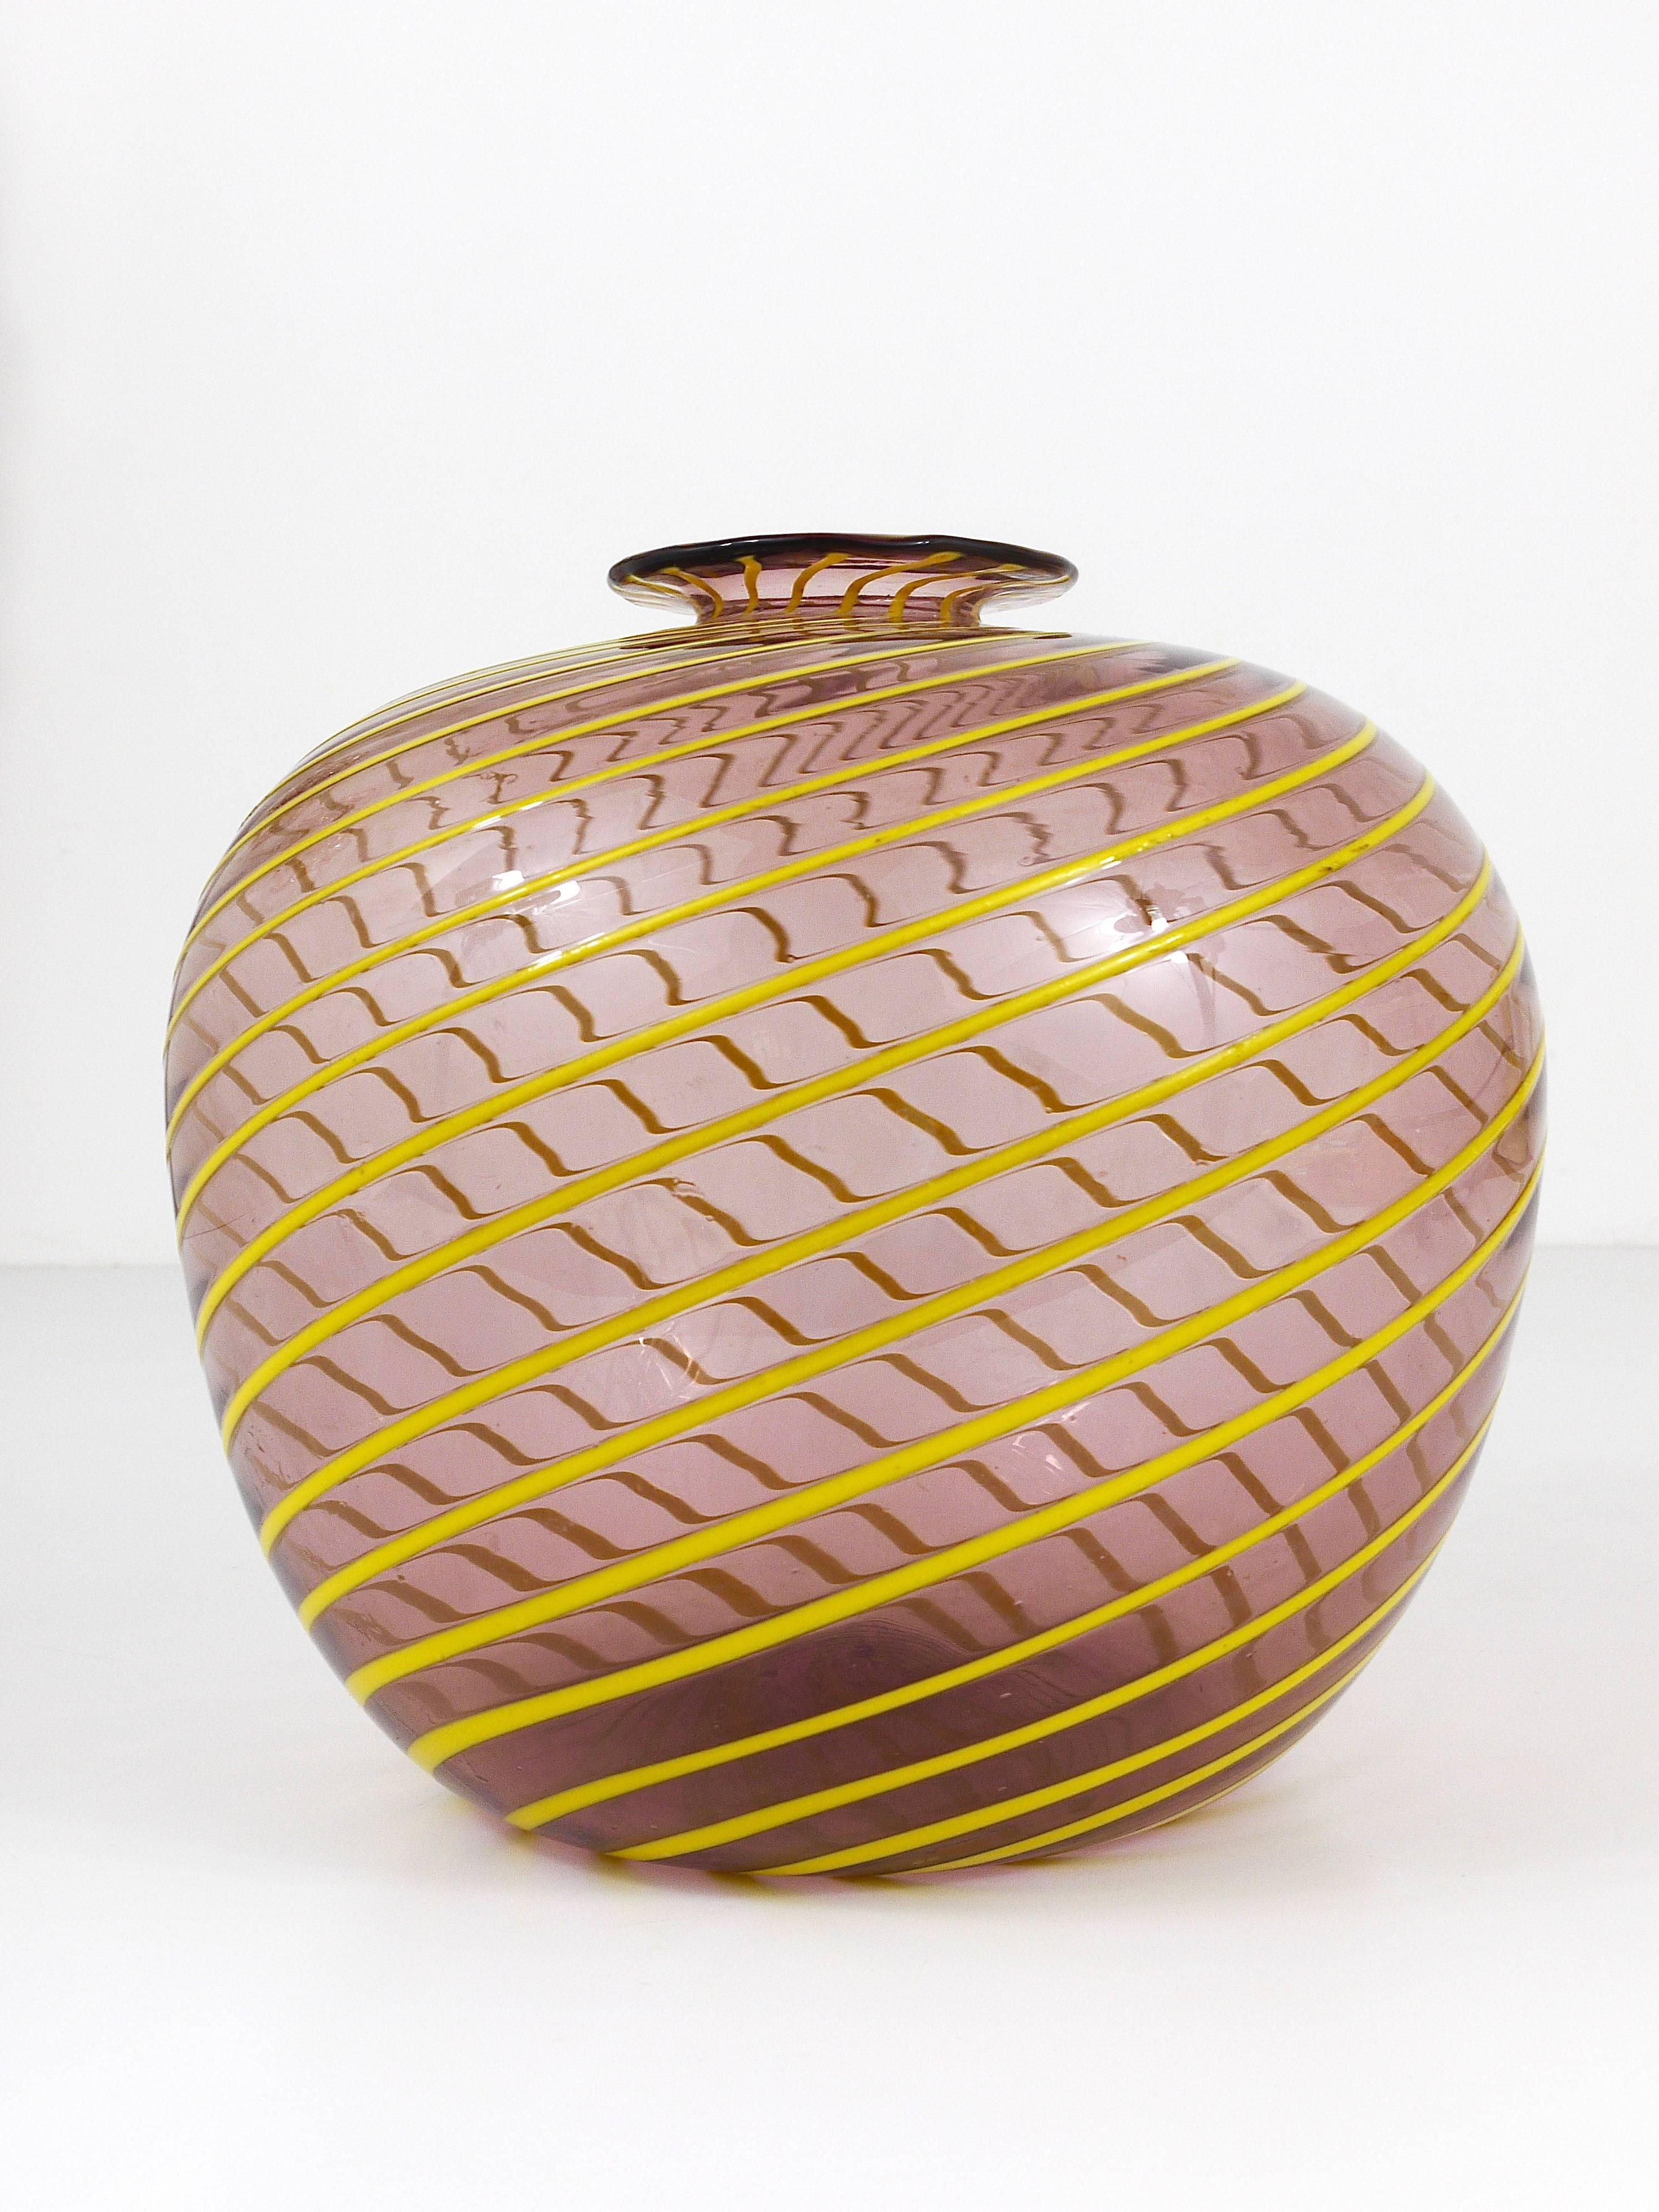 Glass Fratelli Toso Big Purple Murano Swirl Vase with Yellow Stripes, Italy, 1950s